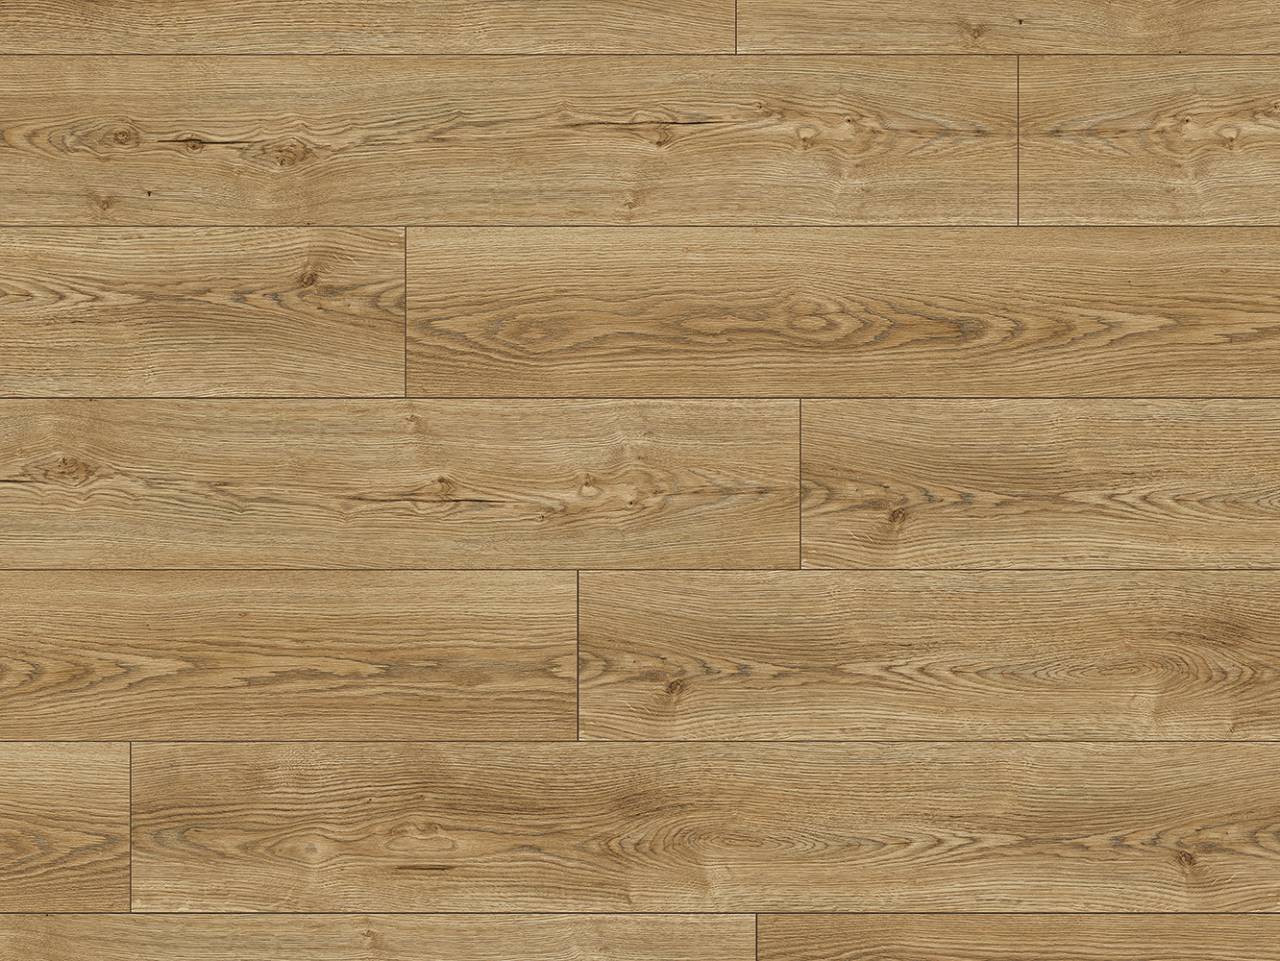 Close-up of 'K483 Antique Sterling Oak' flooring highlighting detailed grain patterns and aged silver-gray hues.